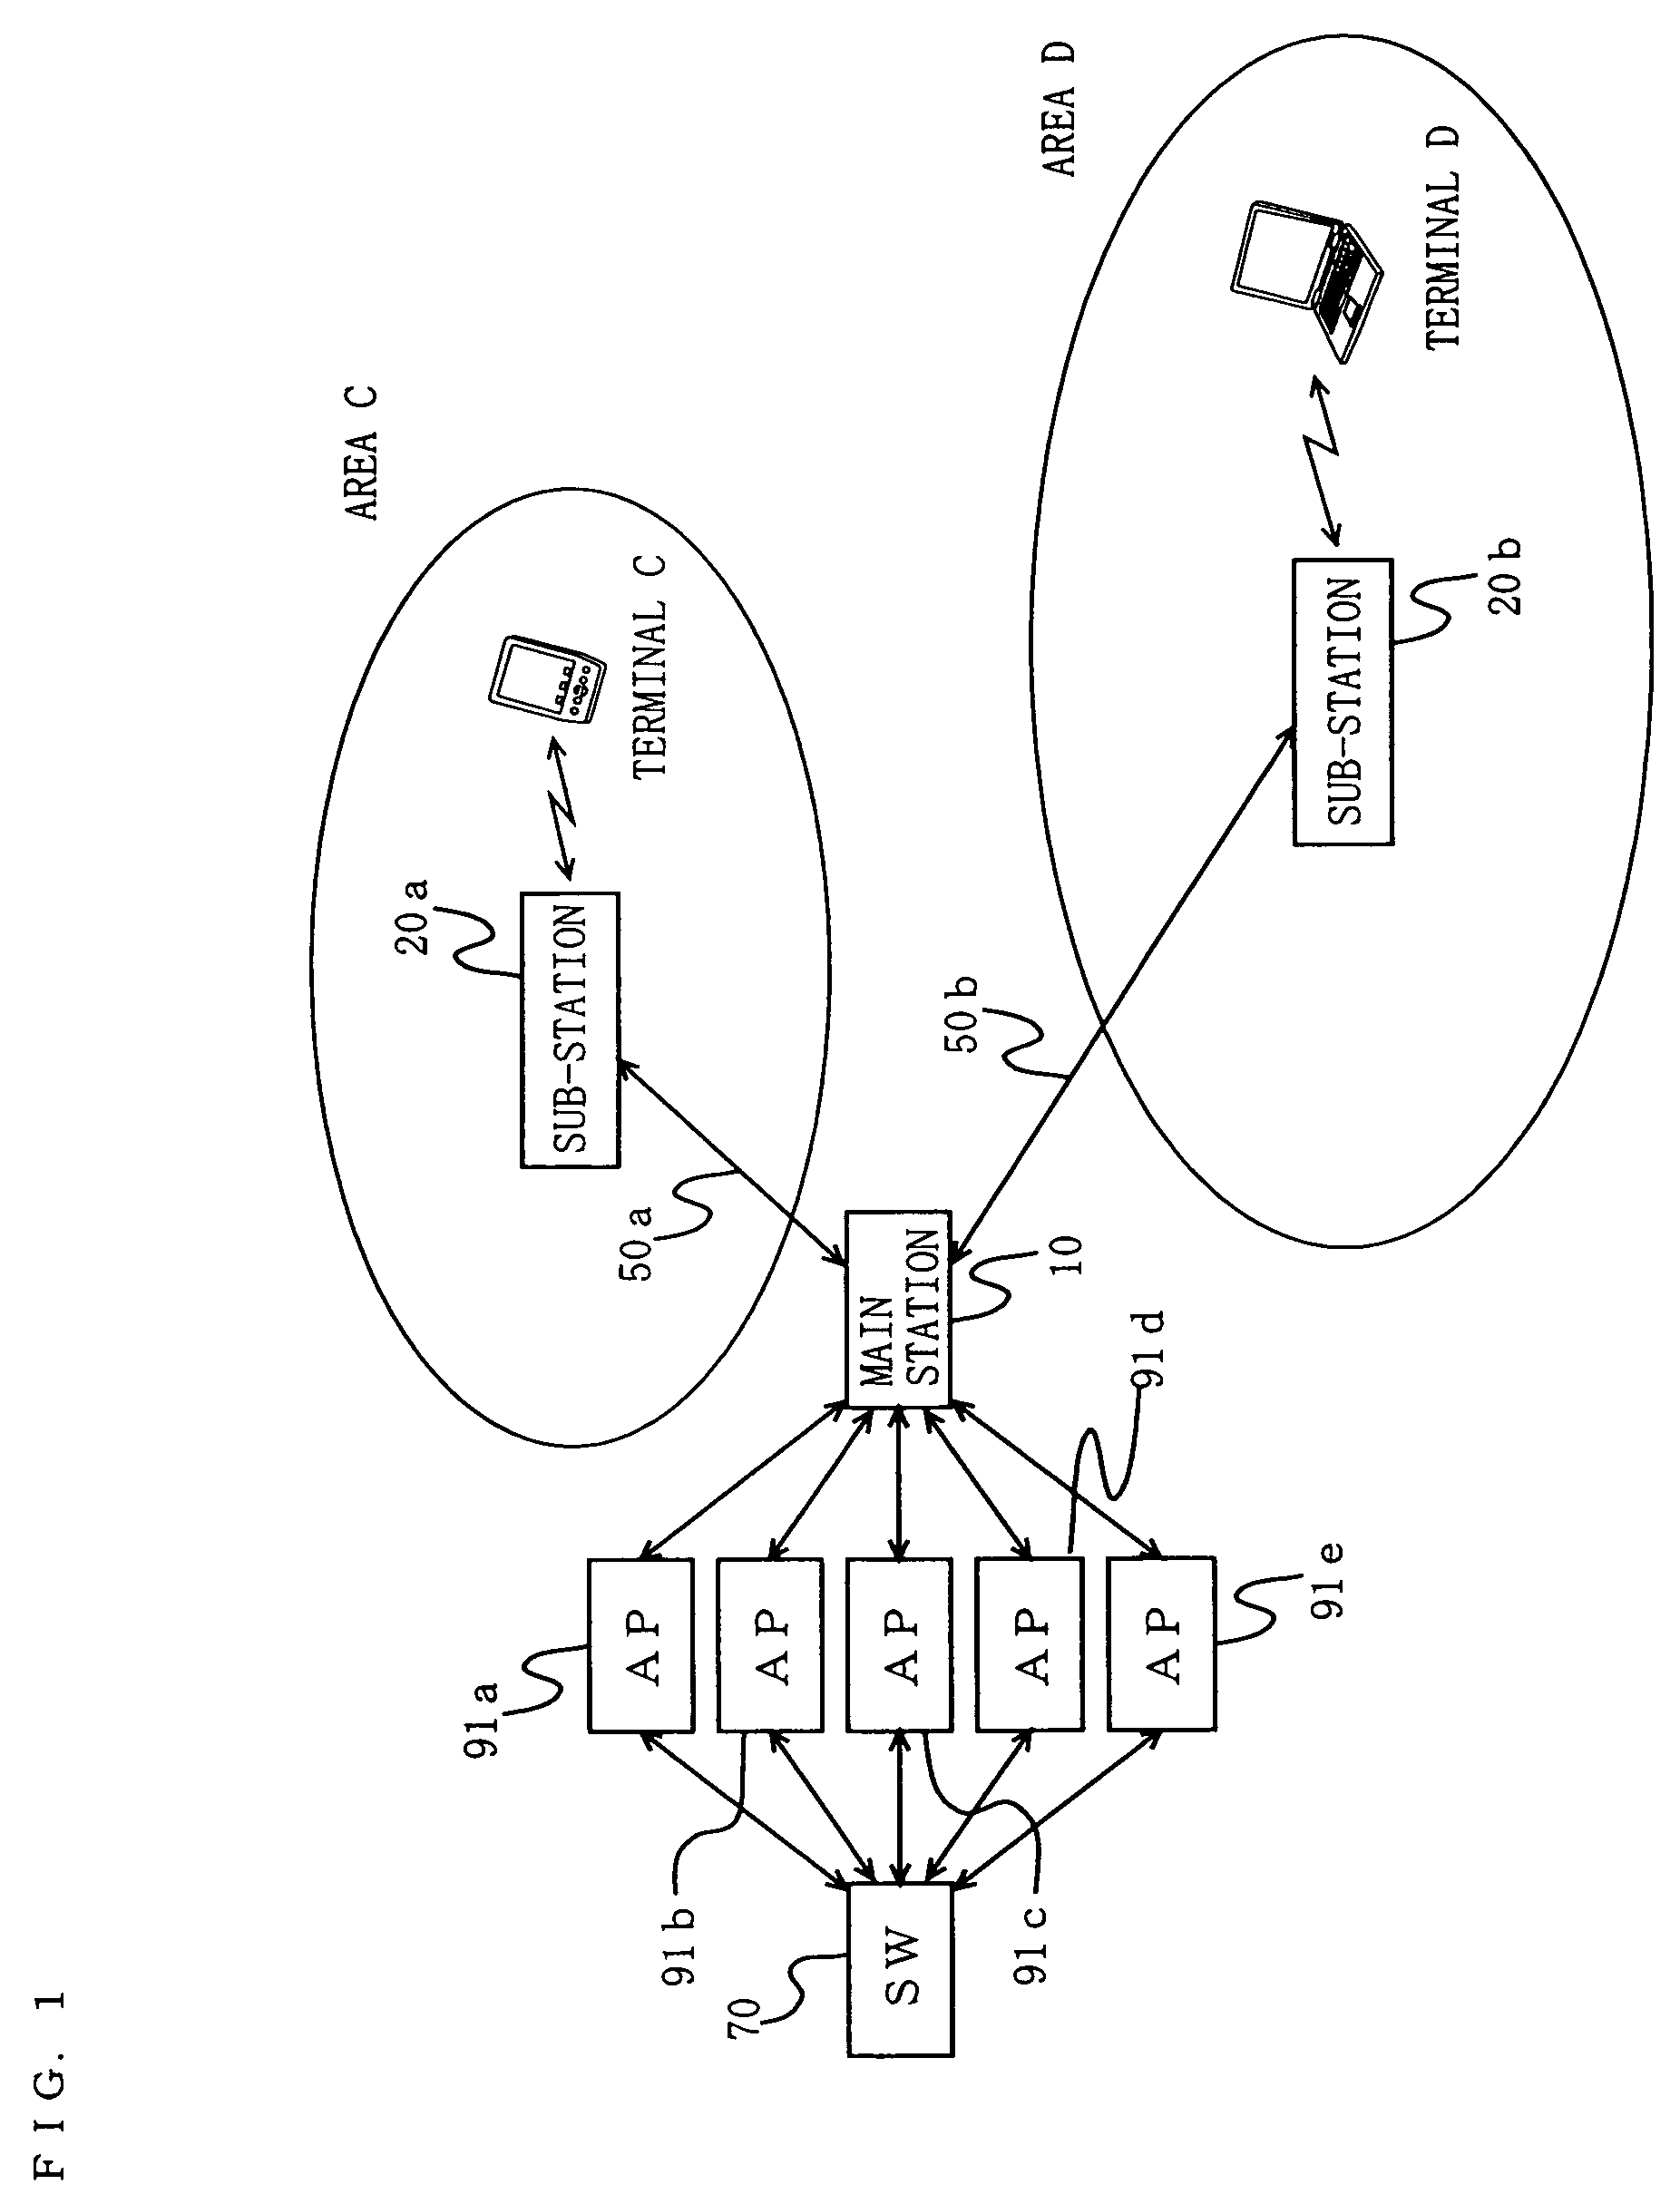 Method and system for extending coverage of WLAN access points via optically multiplexed connection of access points to sub-stations